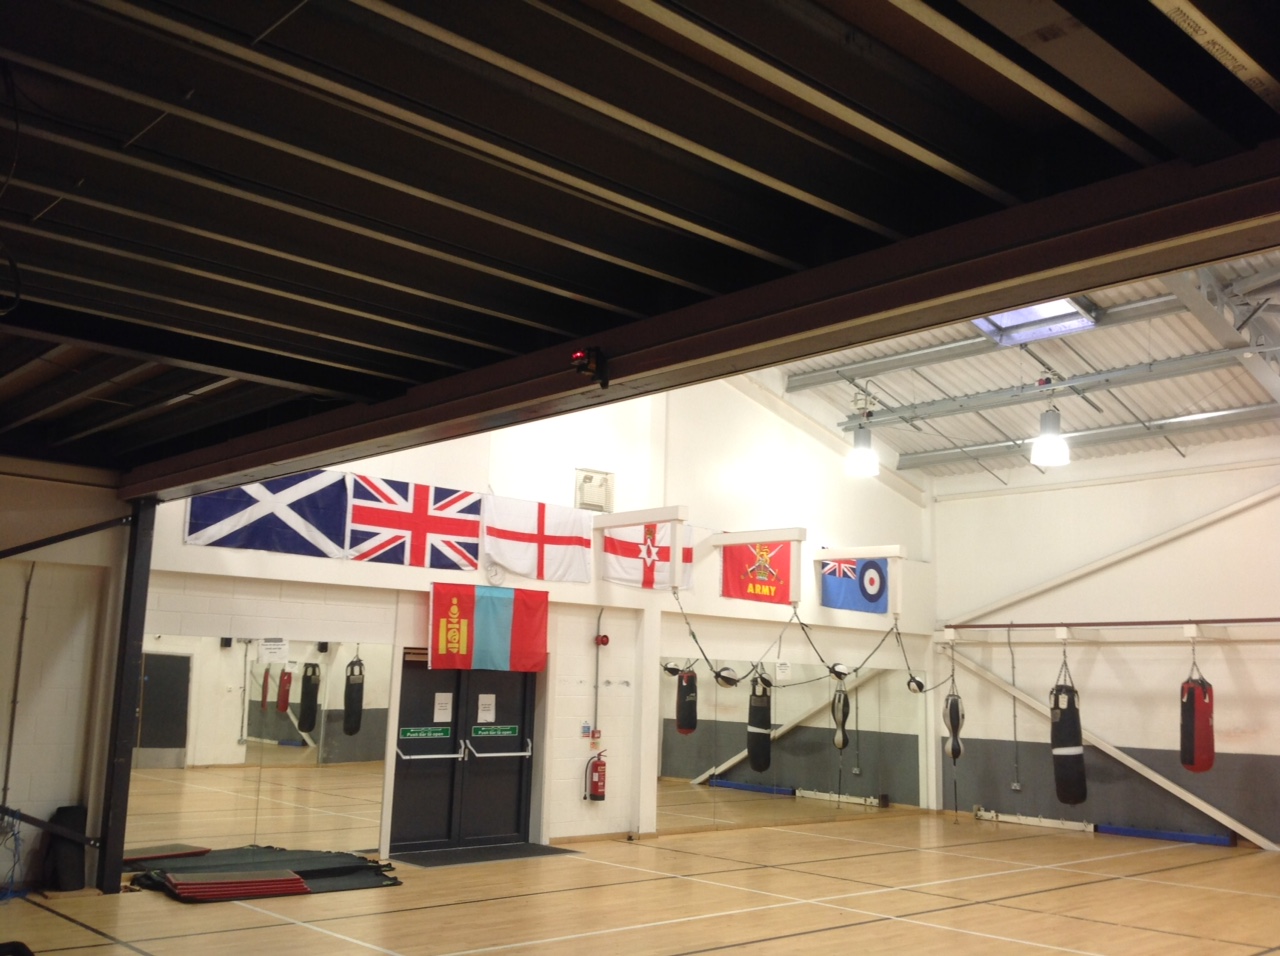 A new mezzanine floor for Woking Boxing Club